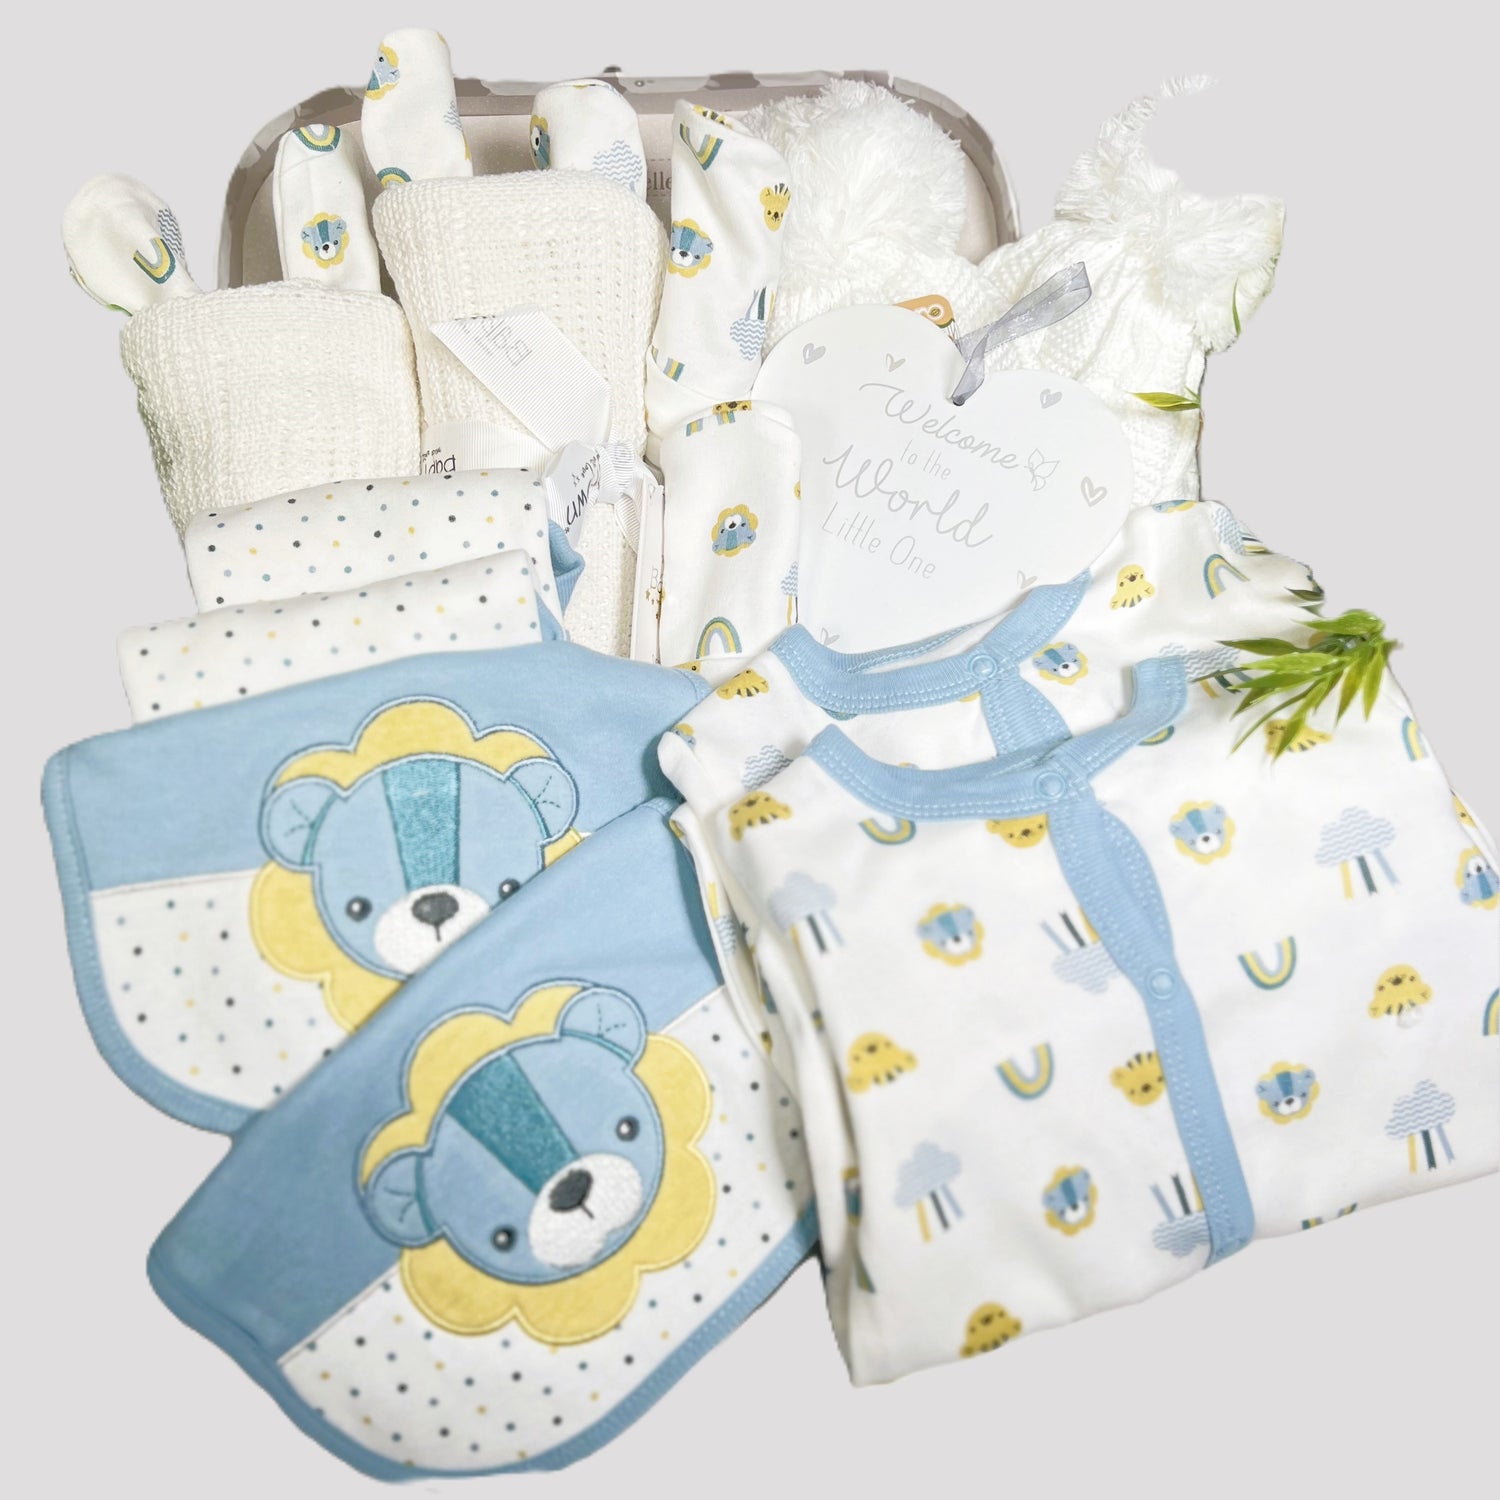 New twins baby boy hamper with lion sleeps suits in blue and yellow with matching baby bodysuits bibs, baby hats and scratch mits plus 2 white cotton cellular baby blankets, 2 white baby pompom hats and a white and grey nursery plaque.